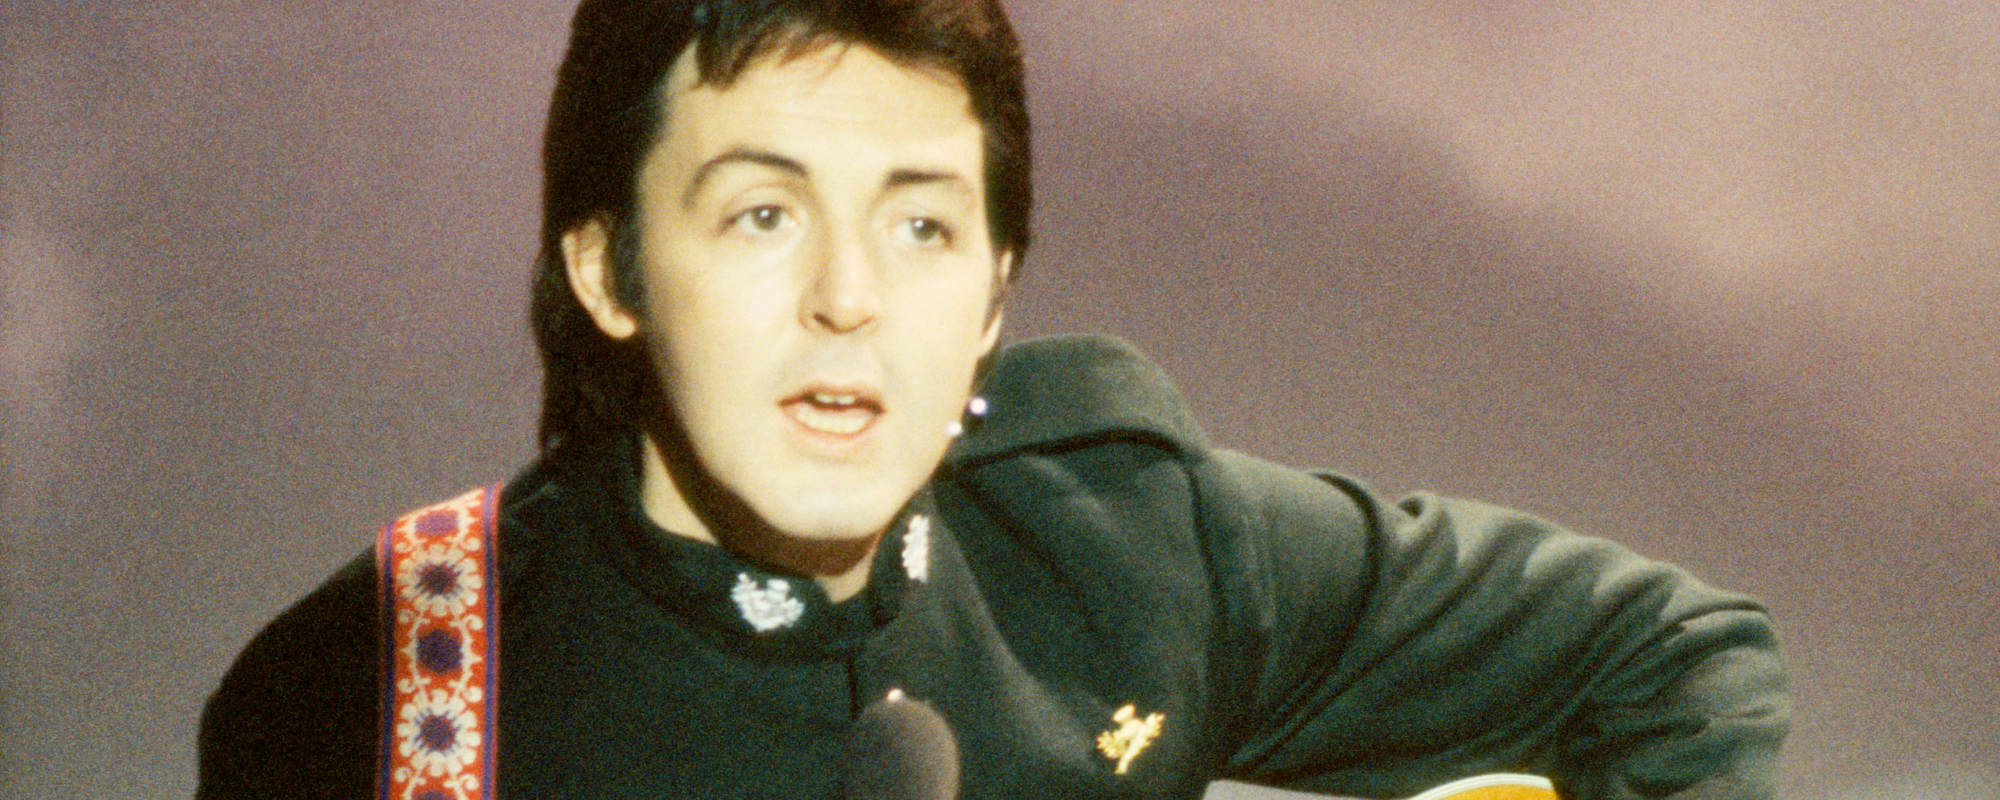 Discover Paul McCartney’s Quirky Long-Lost Christmas Record That He Gifted to the Other Beatles